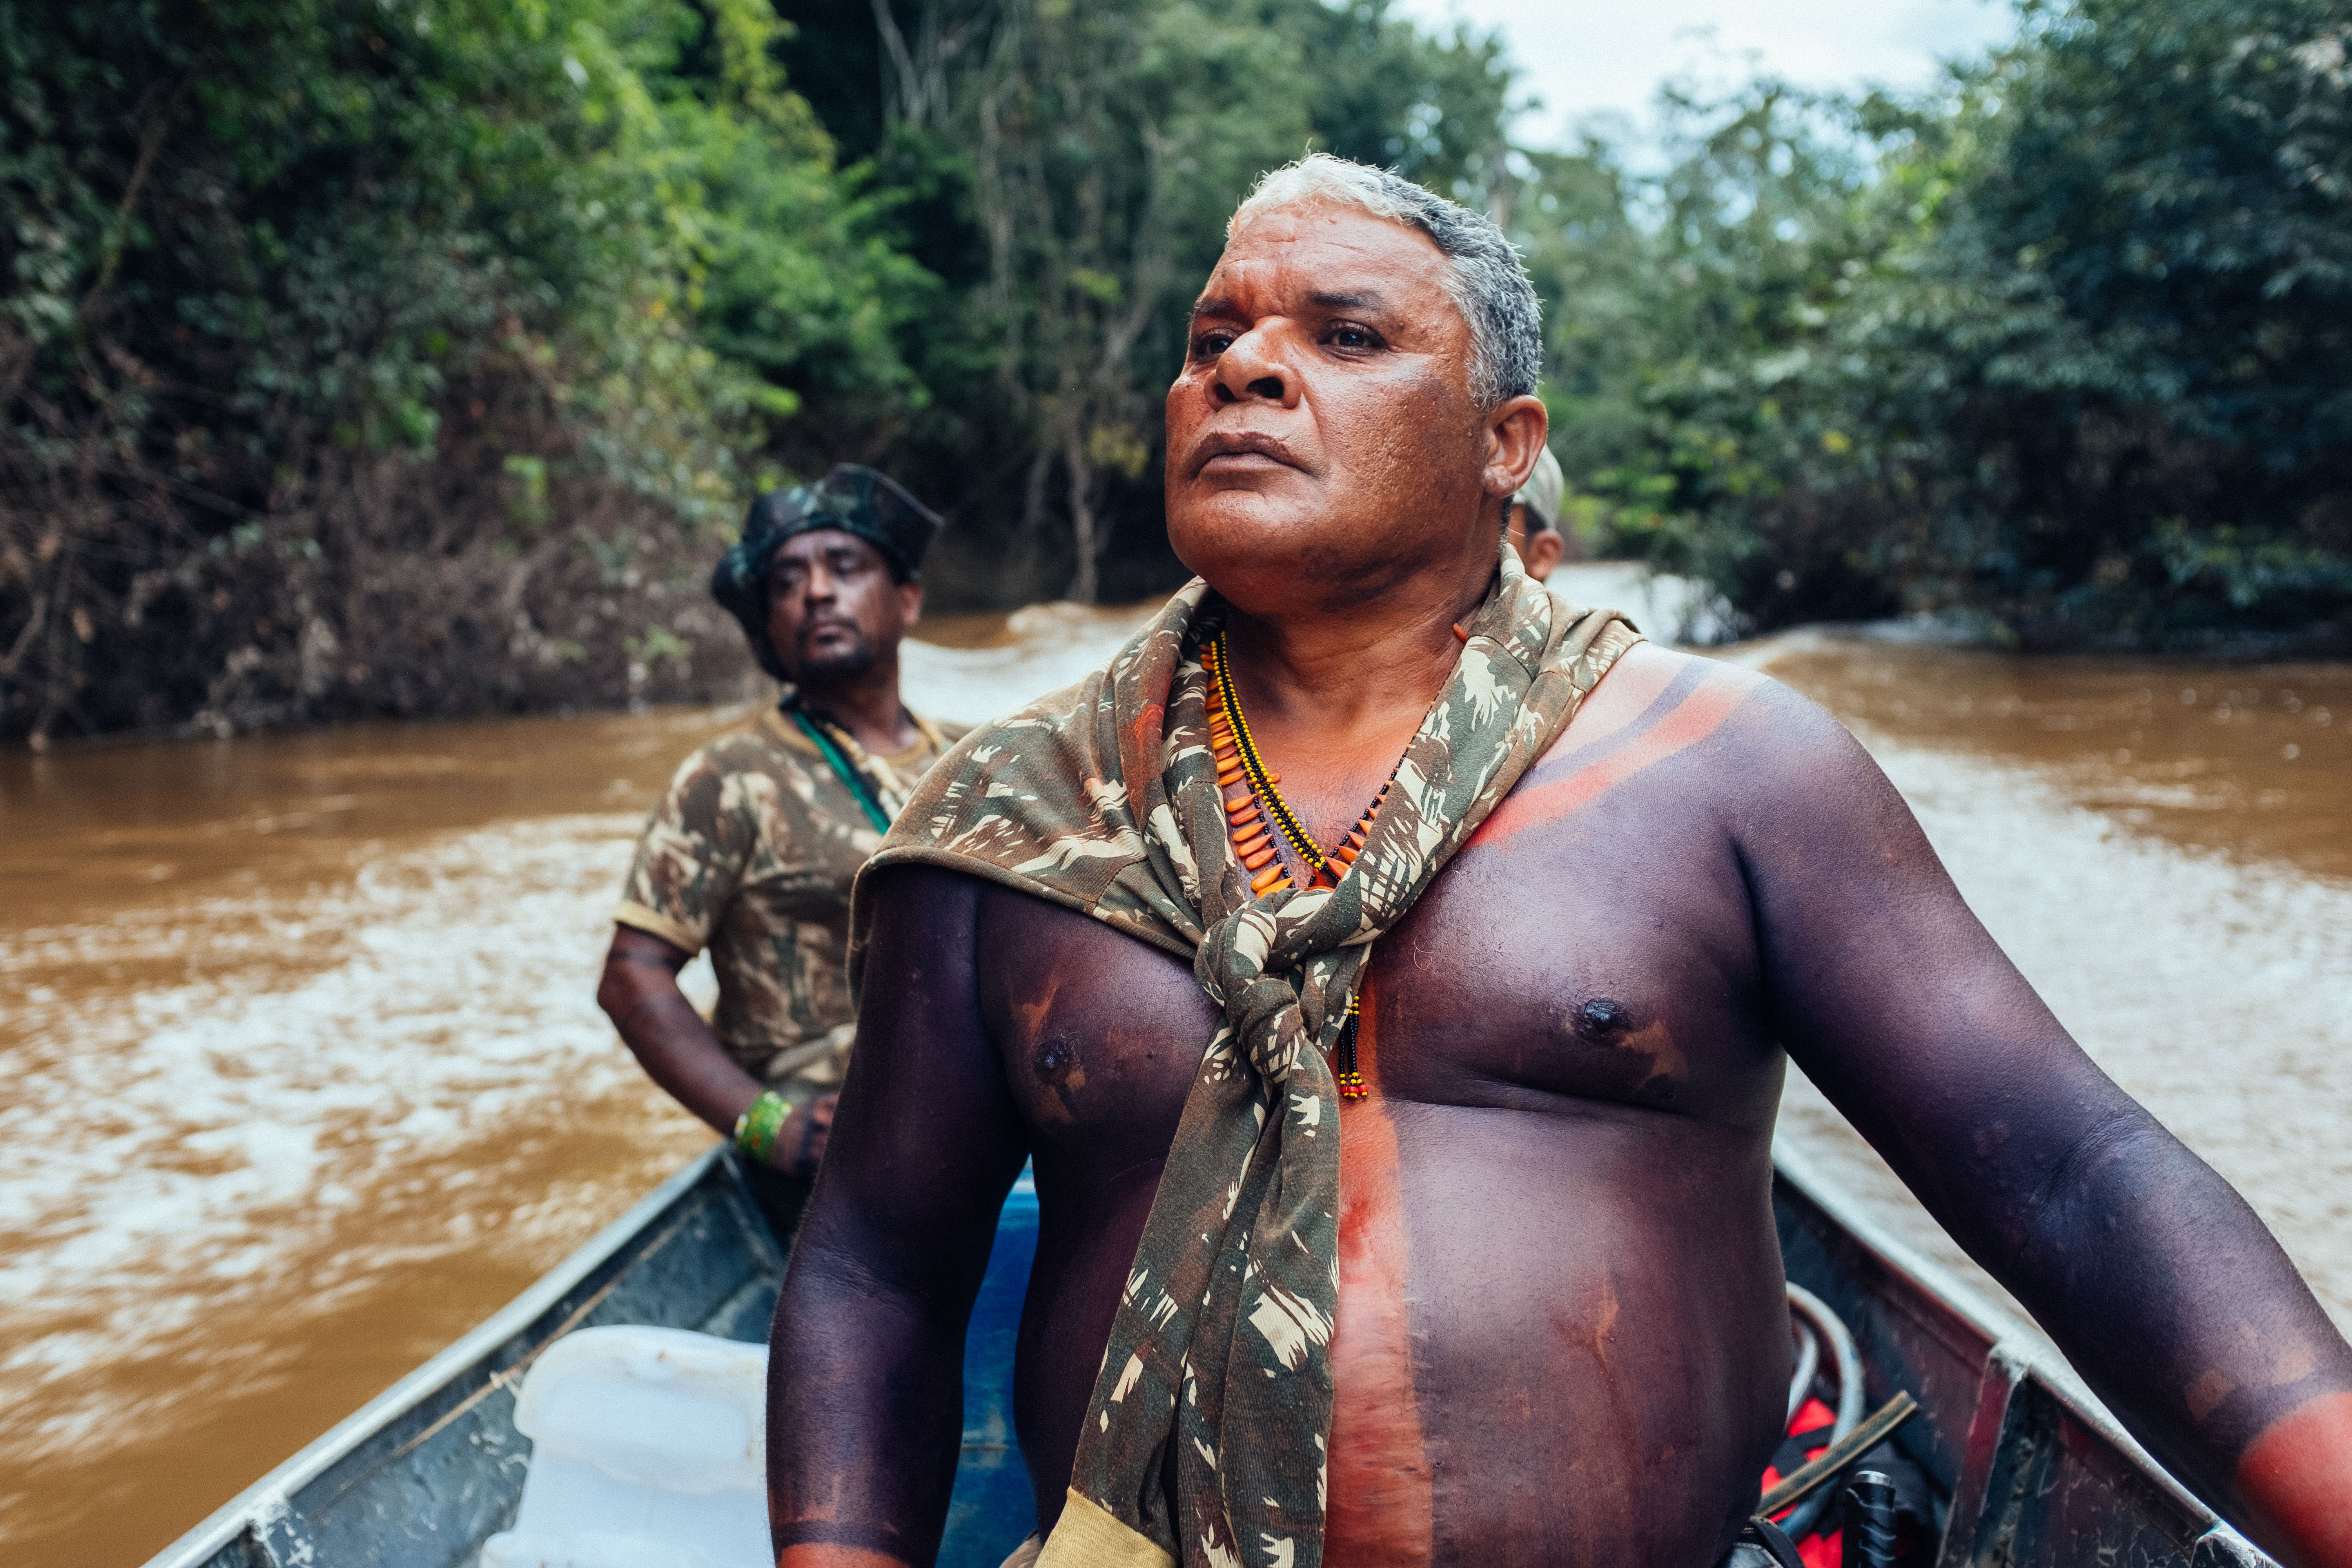 "Sometimes, when we see the trees cut down, we feel rage," says Guajajara Guardians of the Forest chief Claudio da Silva. "This is why we keep fighting, so this doesn't happen." Image by Sam Eaton. Brazil, 2018.